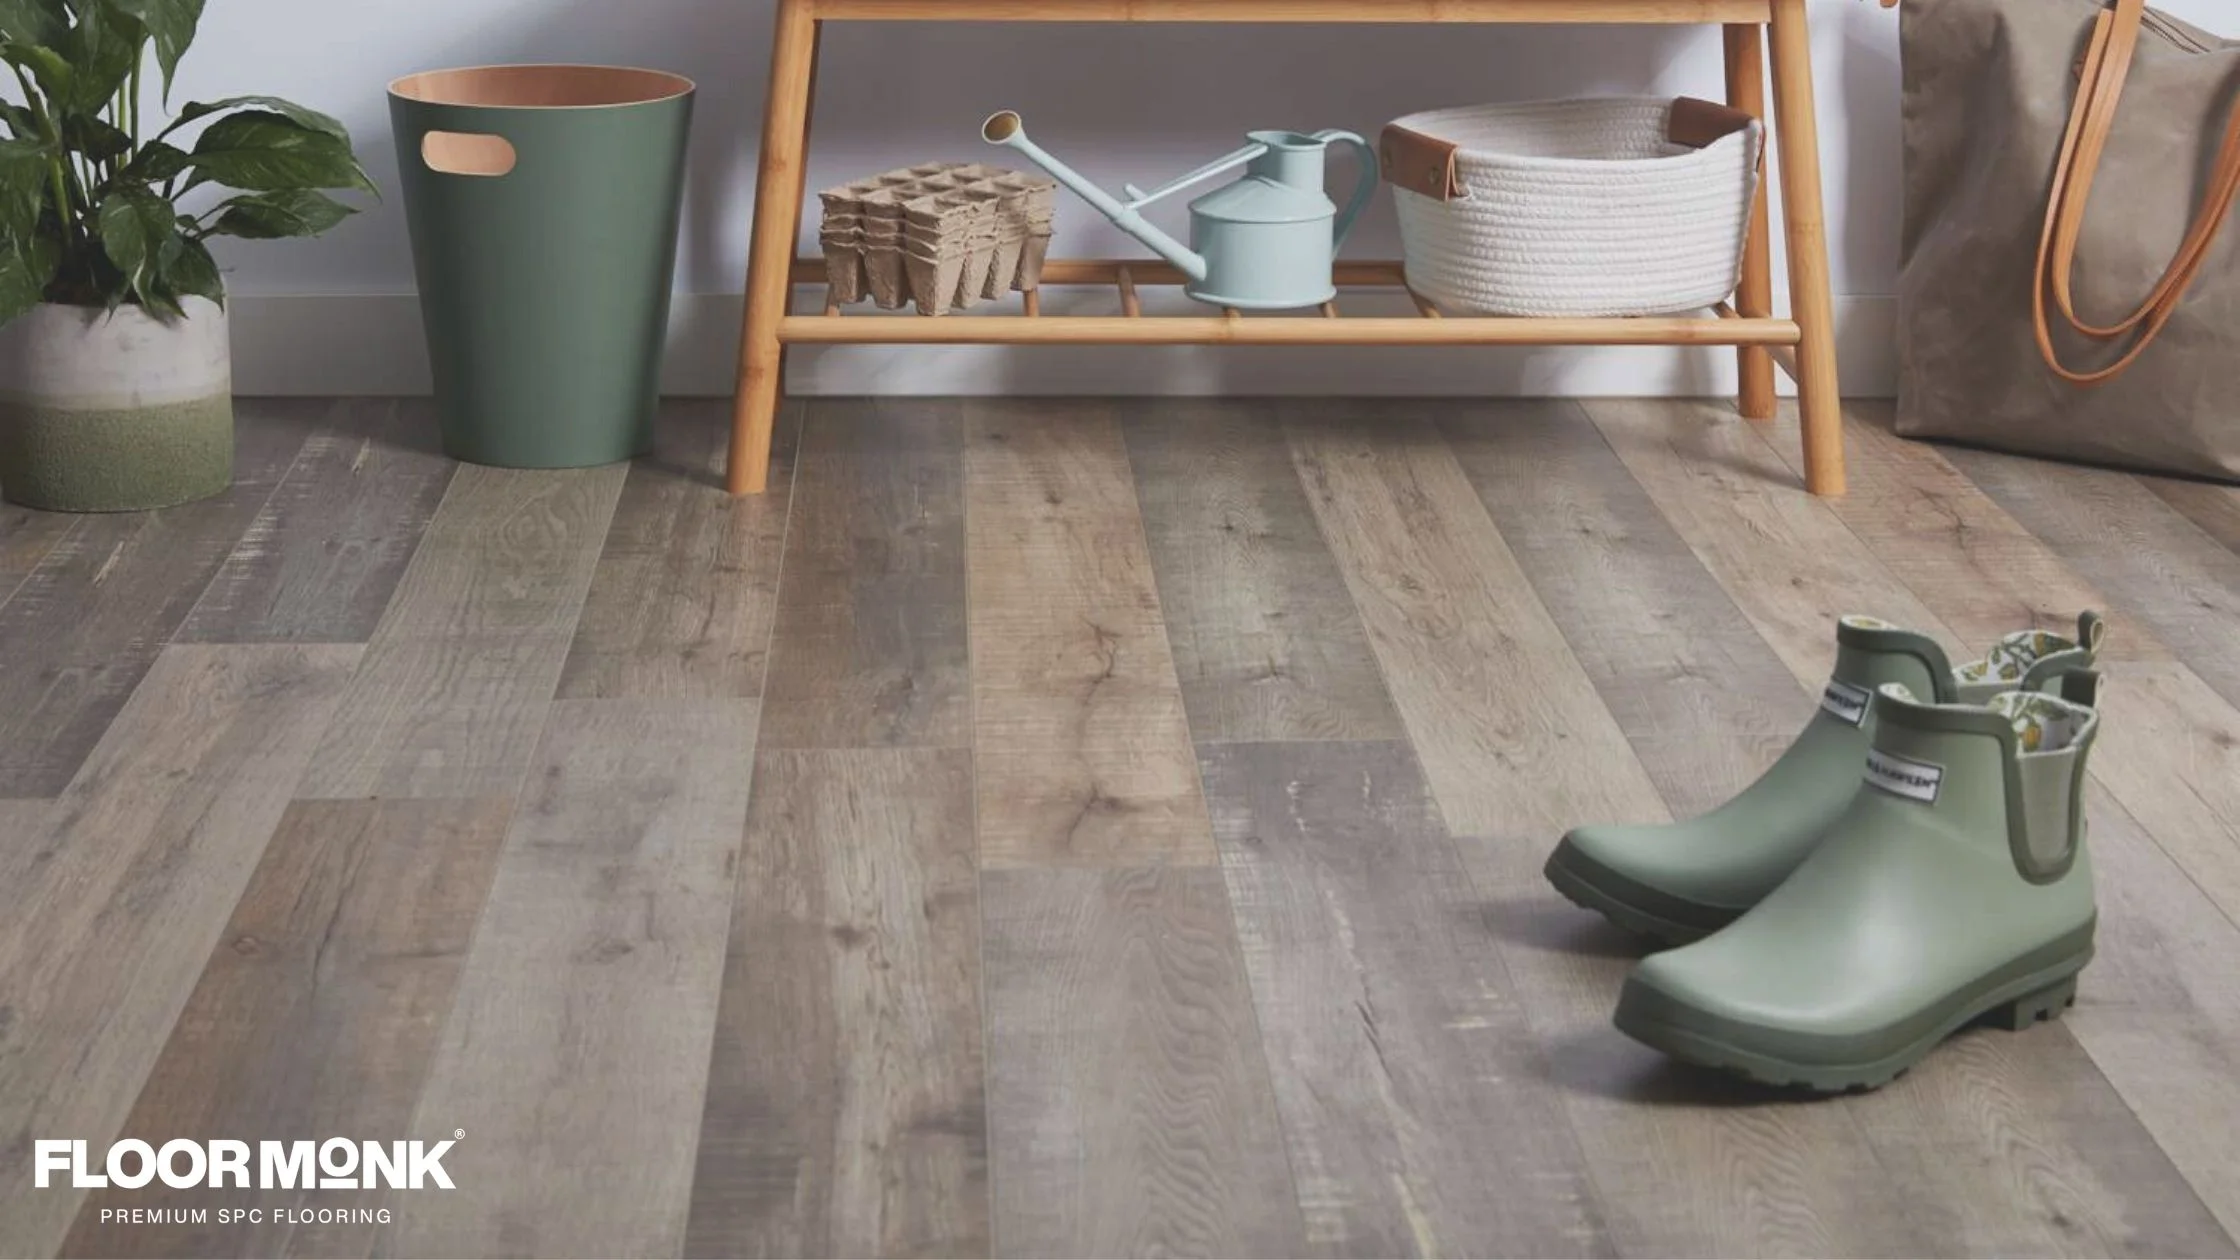 Top Flooring Features for High-traffic Areas